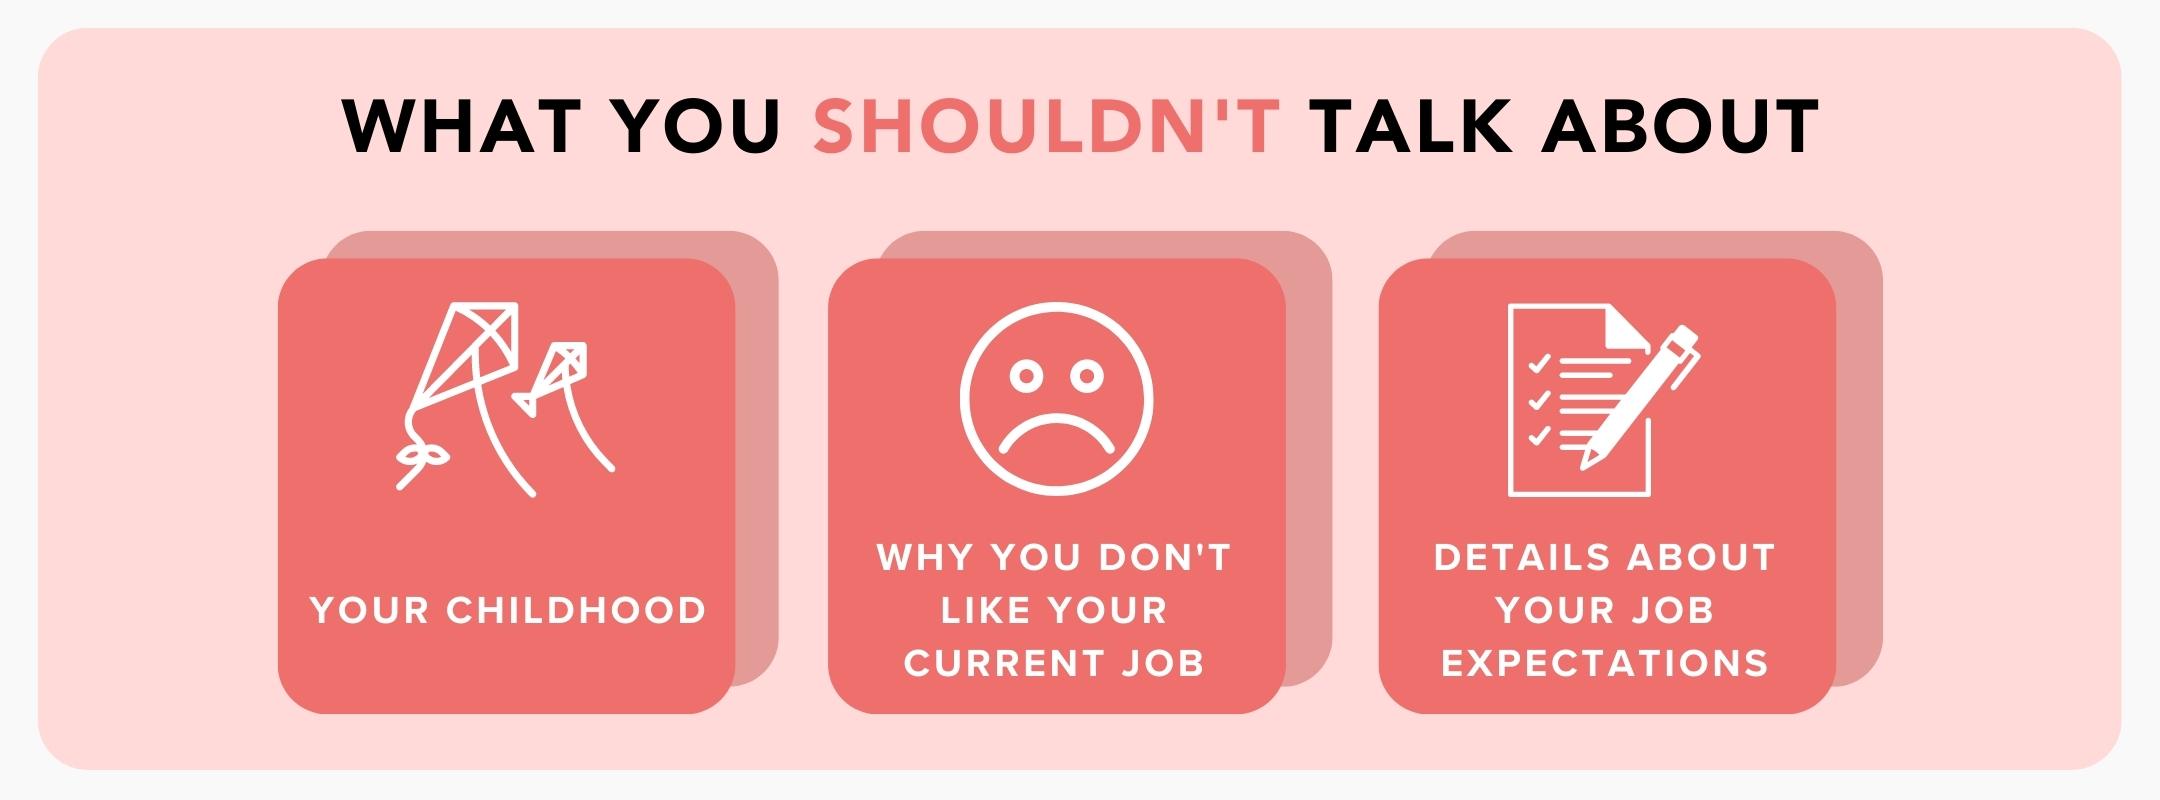 What not to say when asked tell me about yourself:

1) Your childhood
2) Why you don't like your current job
3) Details about your job expectations 